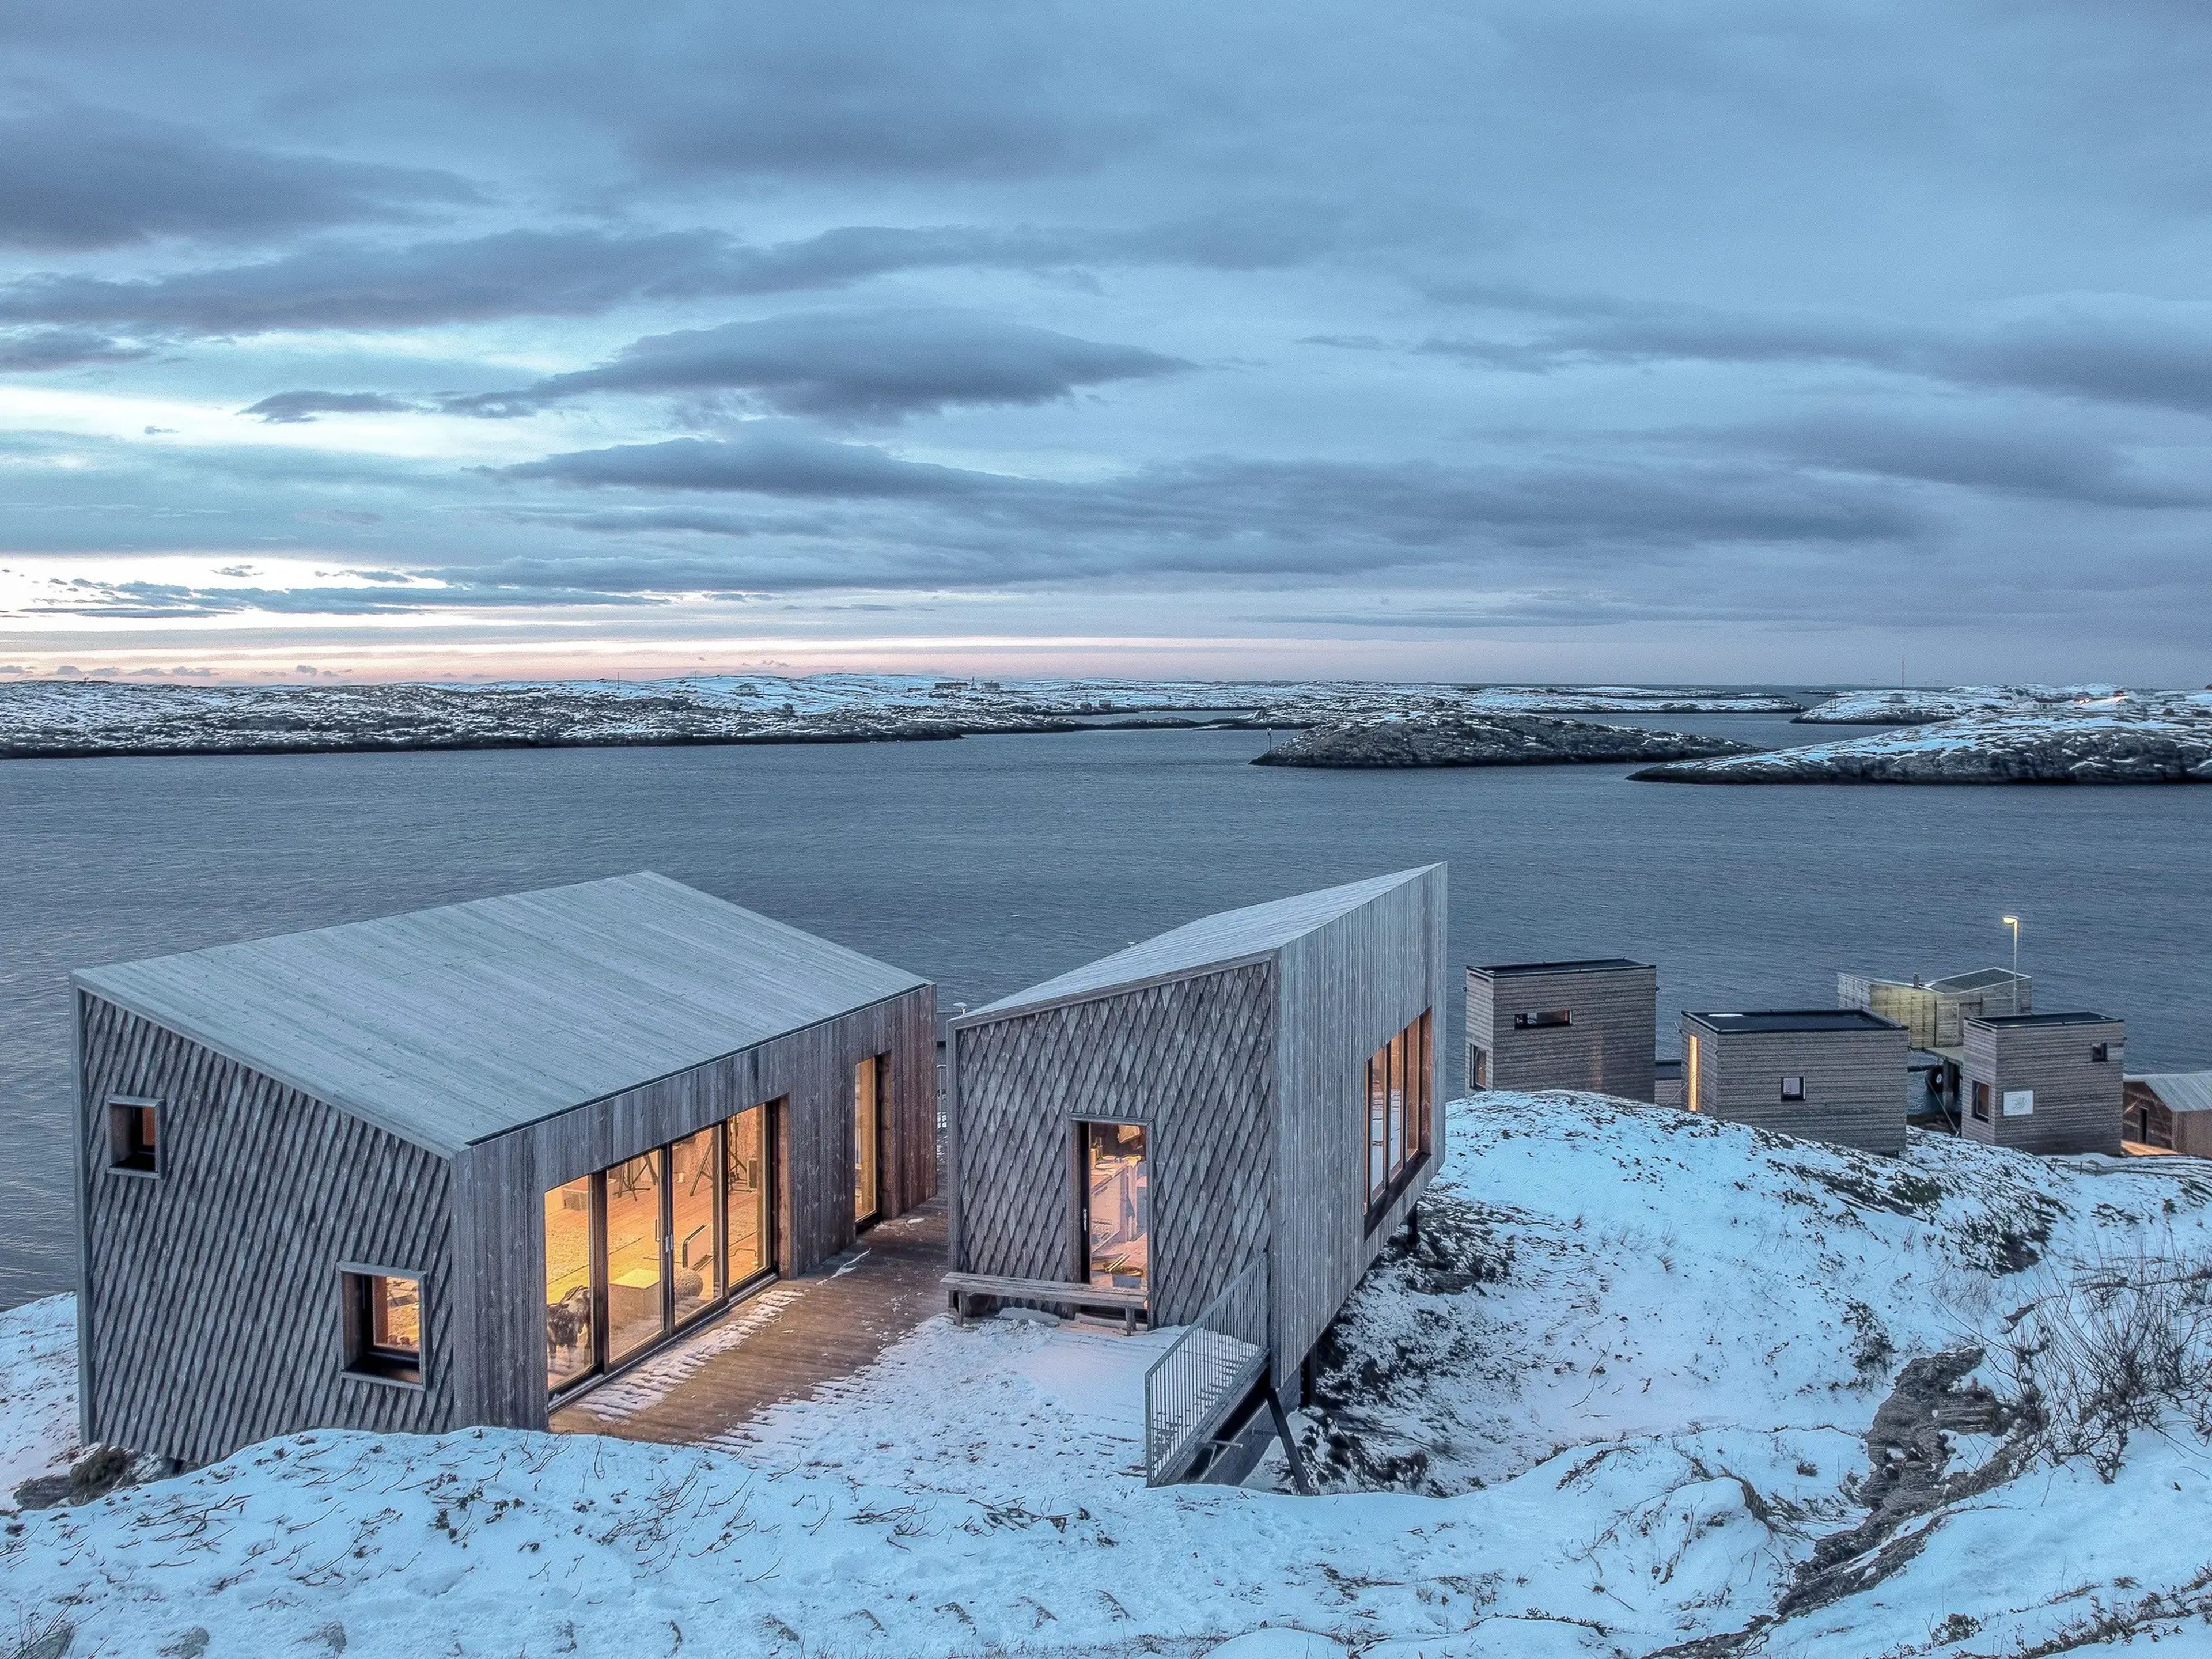 The arctic hideaway on a snow-covered hill